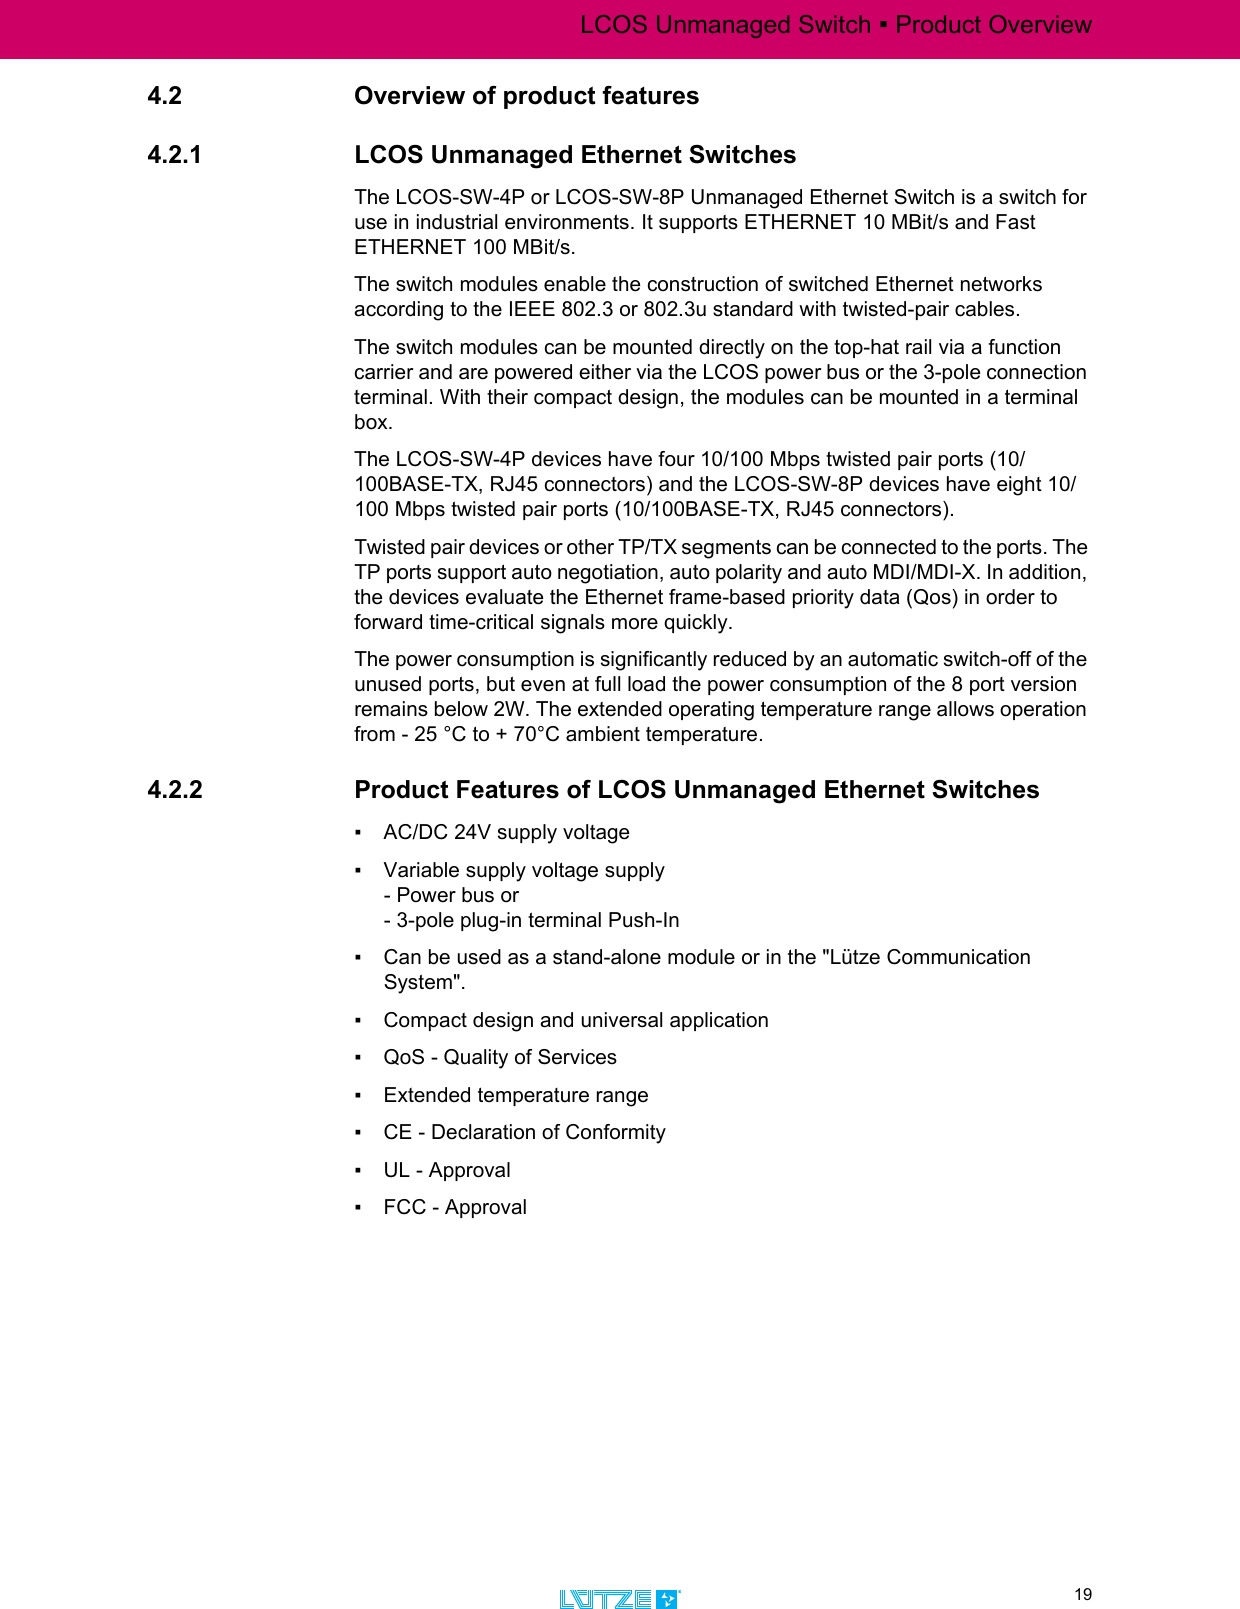 LCOS Unmanaged Switch ▪ Product Overview19TRANSPORTATION4.2 Overview of product features4.2.1 LCOS Unmanaged Ethernet SwitchesThe LCOS-SW-4P or LCOS-SW-8P Unmanaged Ethernet Switch is a switch for use in industrial environments. It supports ETHERNET 10 MBit/s and Fast ETHERNET 100 MBit/s. The switch modules enable the construction of switched Ethernet networks according to the IEEE 802.3 or 802.3u standard with twisted-pair cables. The switch modules can be mounted directly on the top-hat rail via a function carrier and are powered either via the LCOS power bus or the 3-pole connection terminal. With their compact design, the modules can be mounted in a terminal box. The LCOS-SW-4P devices have four 10/100 Mbps twisted pair ports (10/100BASE-TX, RJ45 connectors) and the LCOS-SW-8P devices have eight 10/100 Mbps twisted pair ports (10/100BASE-TX, RJ45 connectors). Twisted pair devices or other TP/TX segments can be connected to the ports. The TP ports support auto negotiation, auto polarity and auto MDI/MDI-X. In addition, the devices evaluate the Ethernet frame-based priority data (Qos) in order to forward time-critical signals more quickly. The power consumption is significantly reduced by an automatic switch-off of the unused ports, but even at full load the power consumption of the 8 port version remains below 2W. The extended operating temperature range allows operation from - 25 °C to + 70°C ambient temperature.4.2.2 Product Features of LCOS Unmanaged Ethernet Switches▪ AC/DC 24V supply voltage ▪ Variable supply voltage supply - Power bus or - 3-pole plug-in terminal Push-In ▪ Can be used as a stand-alone module or in the &quot;Lütze Communication System&quot;.▪ Compact design and universal application ▪ QoS - Quality of Services ▪ Extended temperature range▪ CE - Declaration of Conformity▪ UL - Approval ▪ FCC - Approval